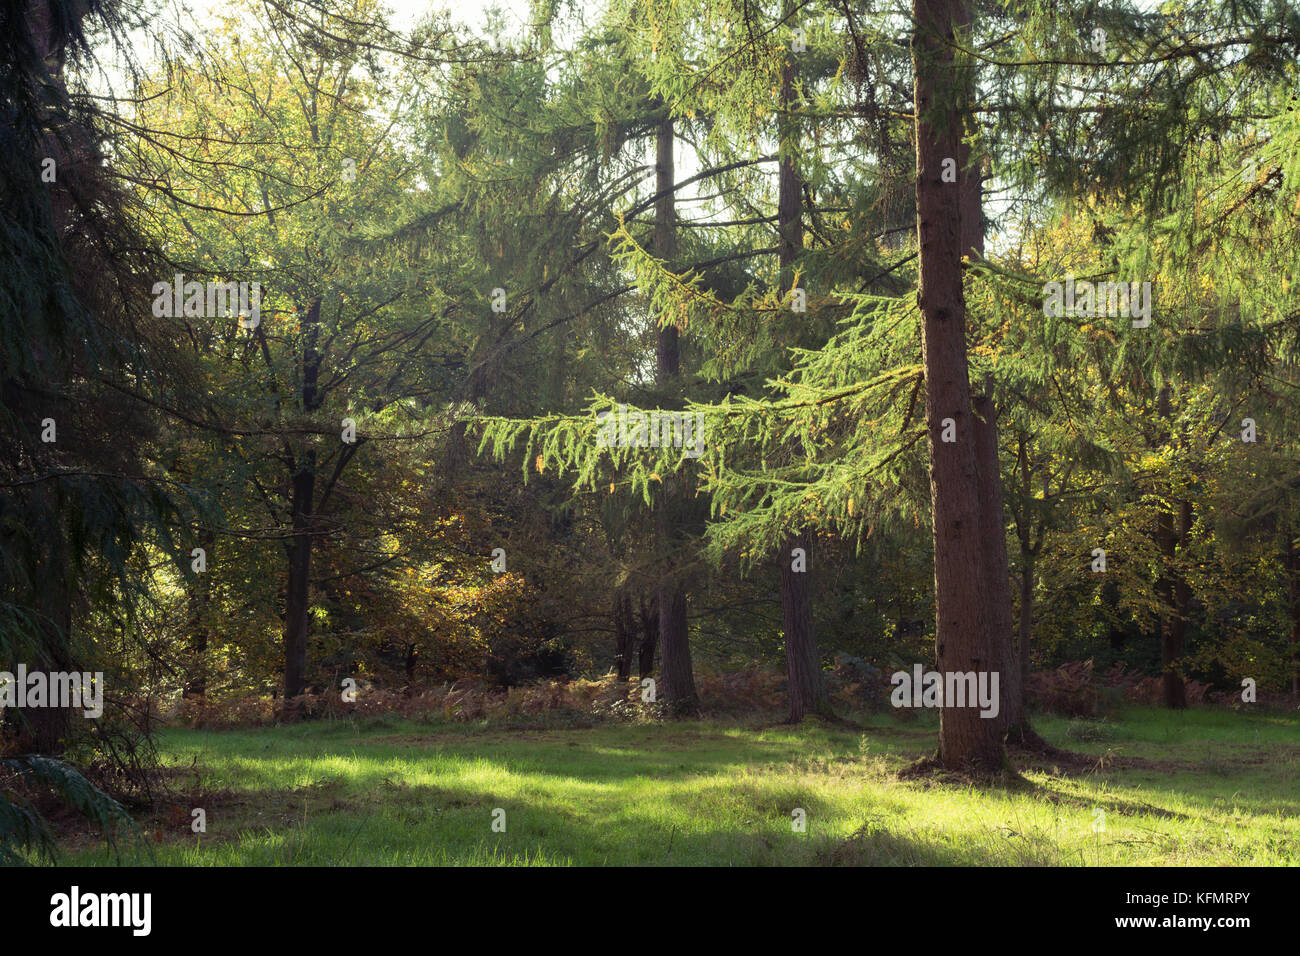 Woodland landscape in Alice Holt Forest Arboretum in the South Downs National Park in Hampshire, UK Stock Photo